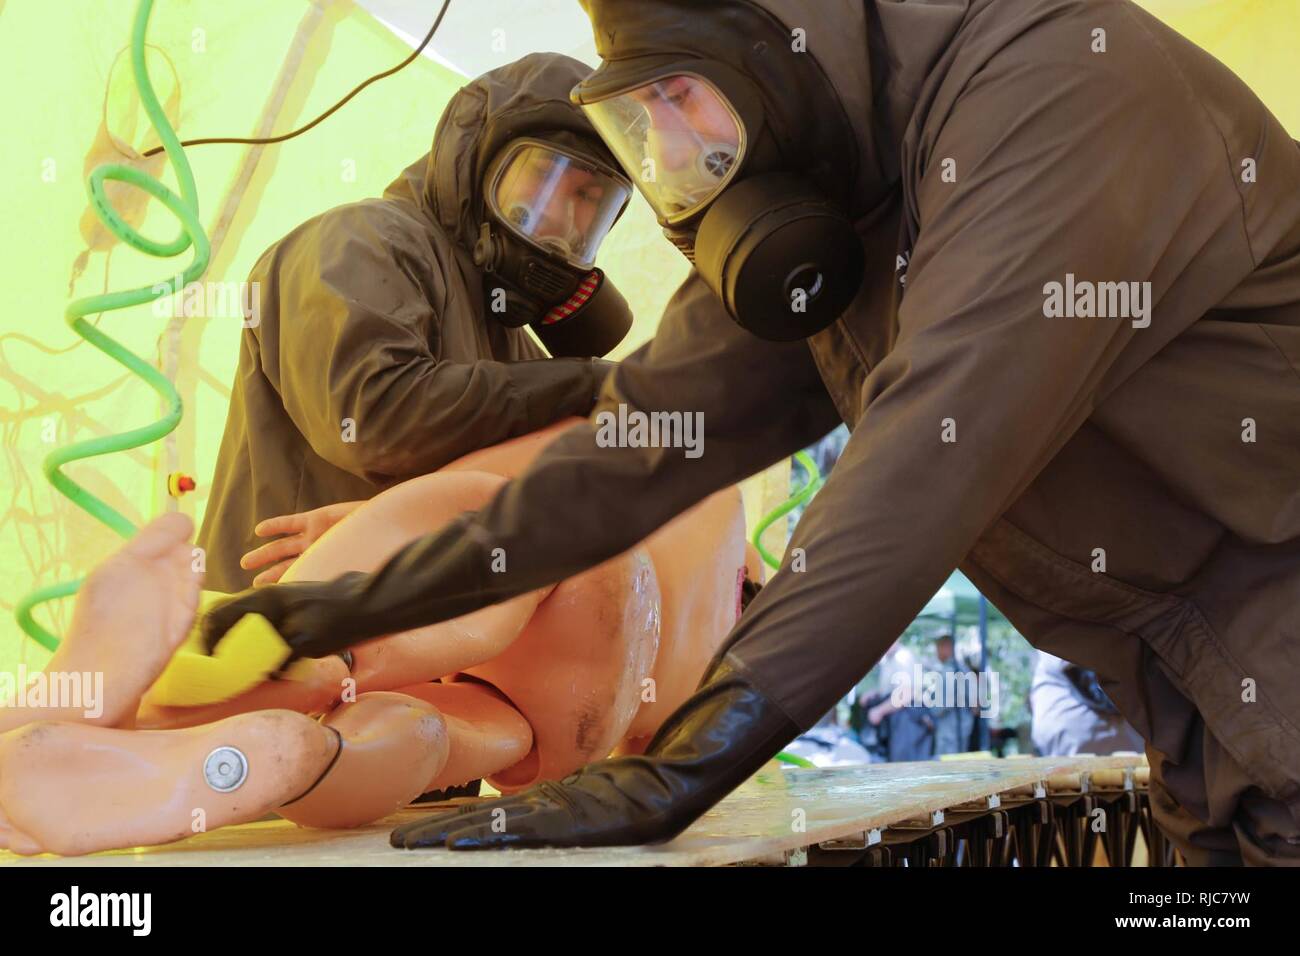 U. S. Army Reserve Soldiers assigned to 468th engineer detachment decontaminates casualties in a Joint Training Exercise on Miami- Dade Fire Rescue Urban Search and Rescue Training Site in Miami, Fla. Jan. 09, 2018. This JTE focused on building response capabilities and seamless transition between the local first responders and the follow-on support provided by the National Guard and Active duty soldiers. (U. S. Army Stock Photo